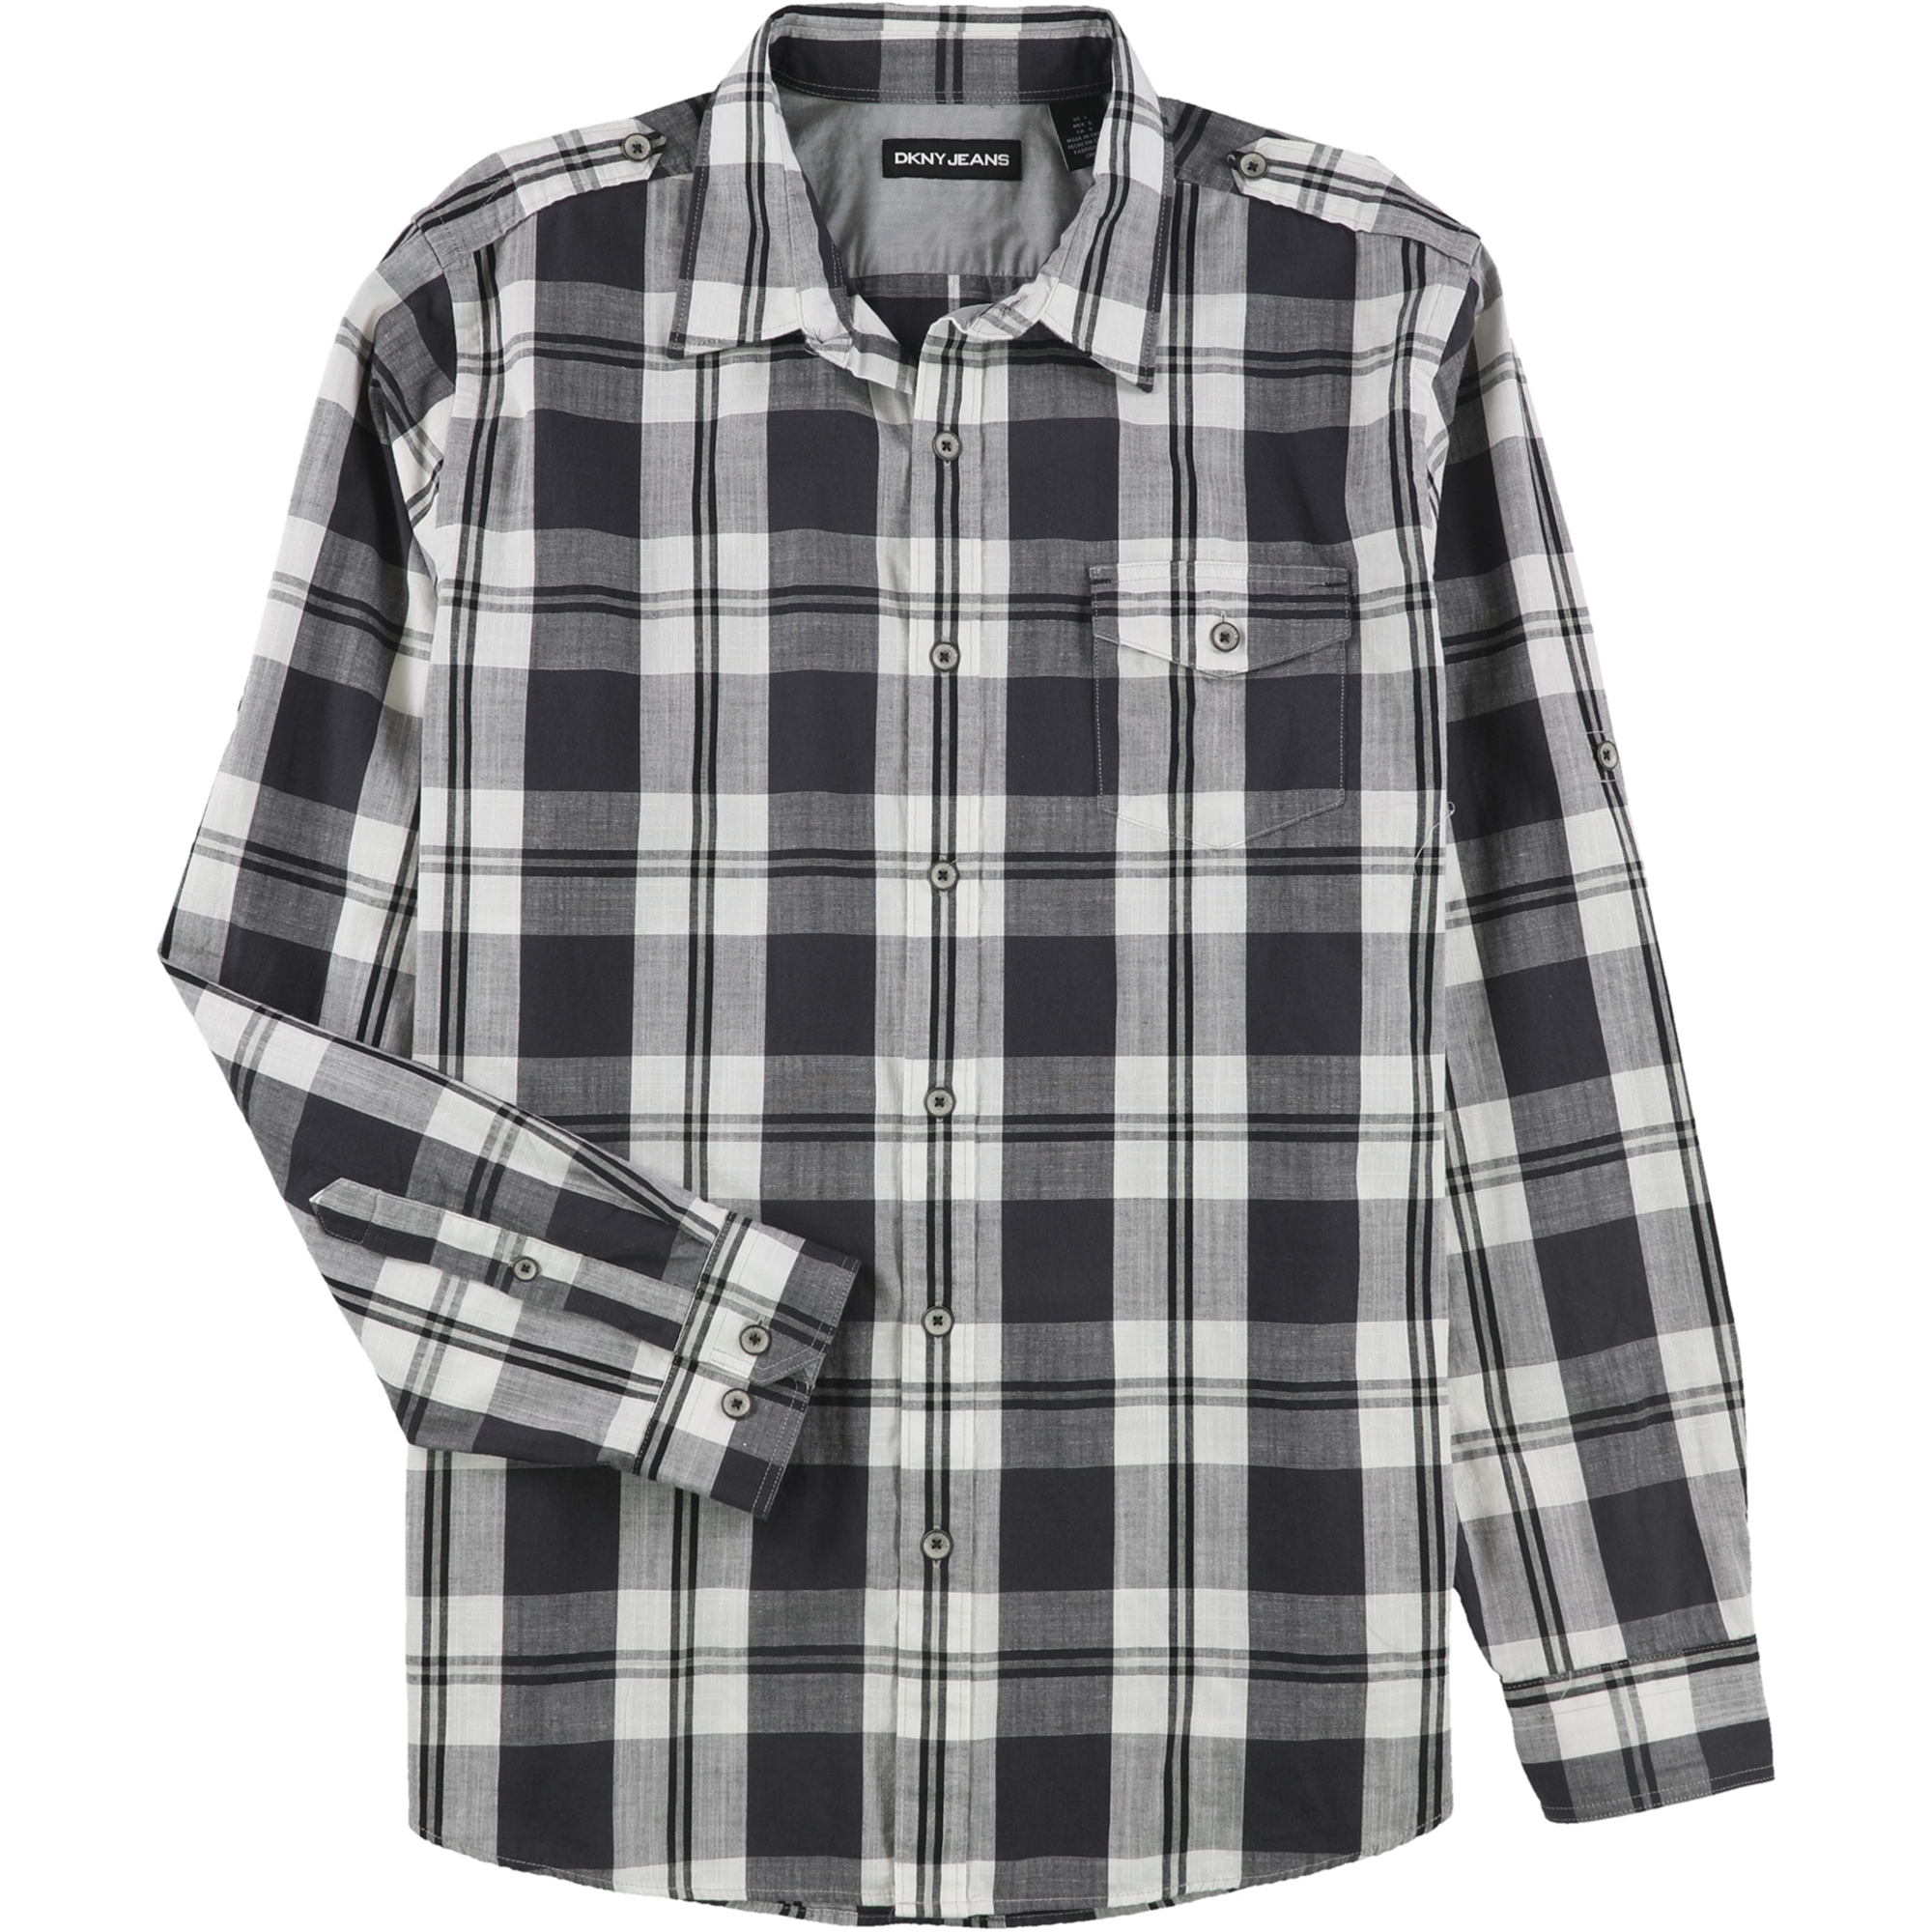 DKNY Mens Plaid Button Up Shirt | Mens Apparel | Free Shipping on All ...